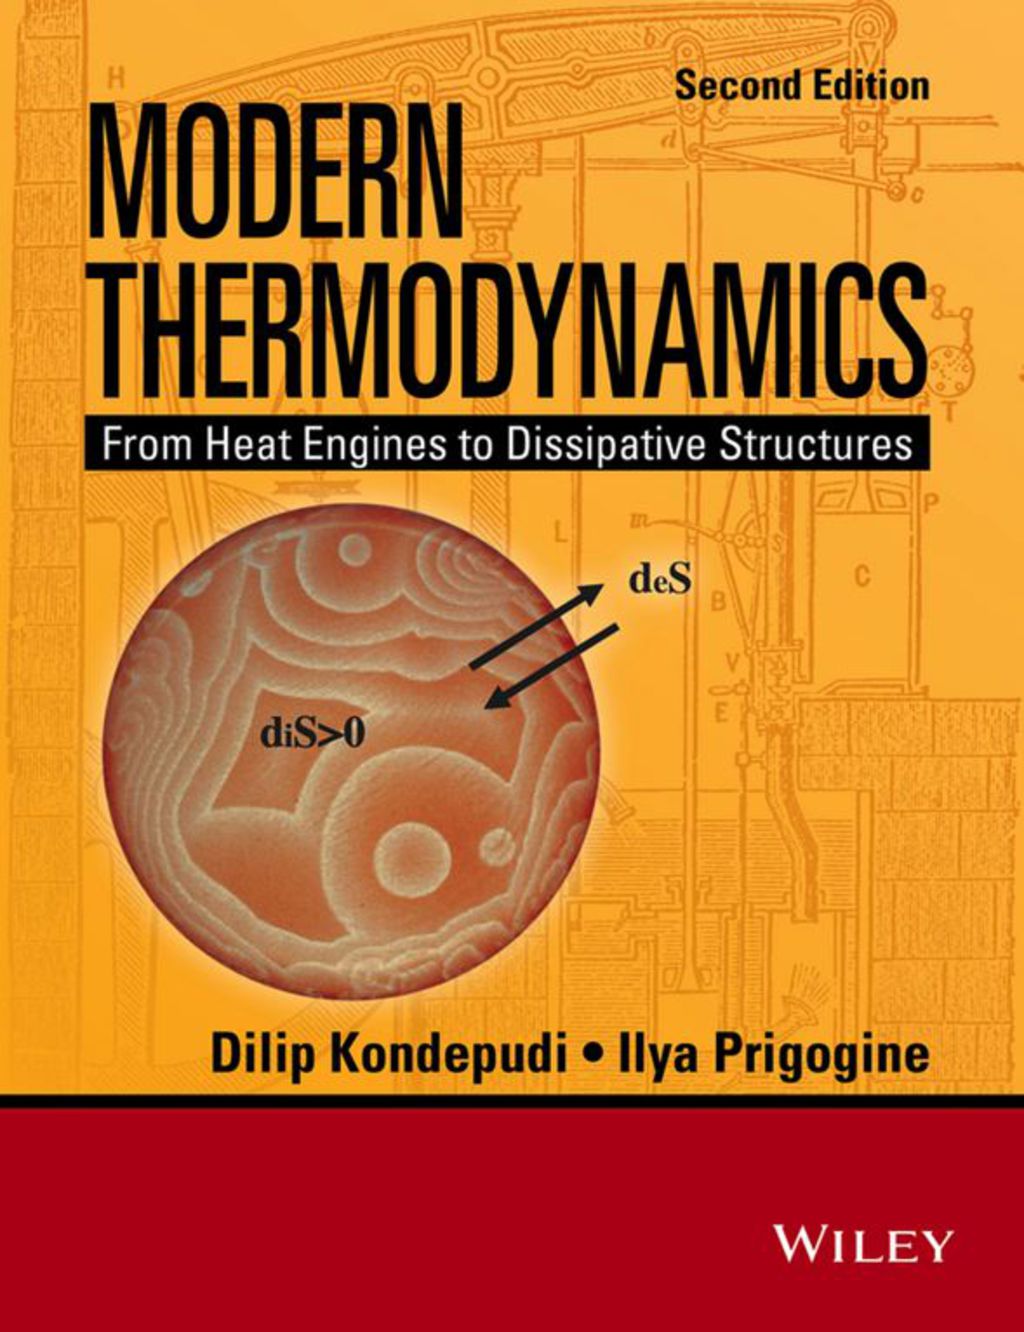 Modern Thermodynamics: From Heat Engines to Dissipative Structures - 2nd Edition (eBook)